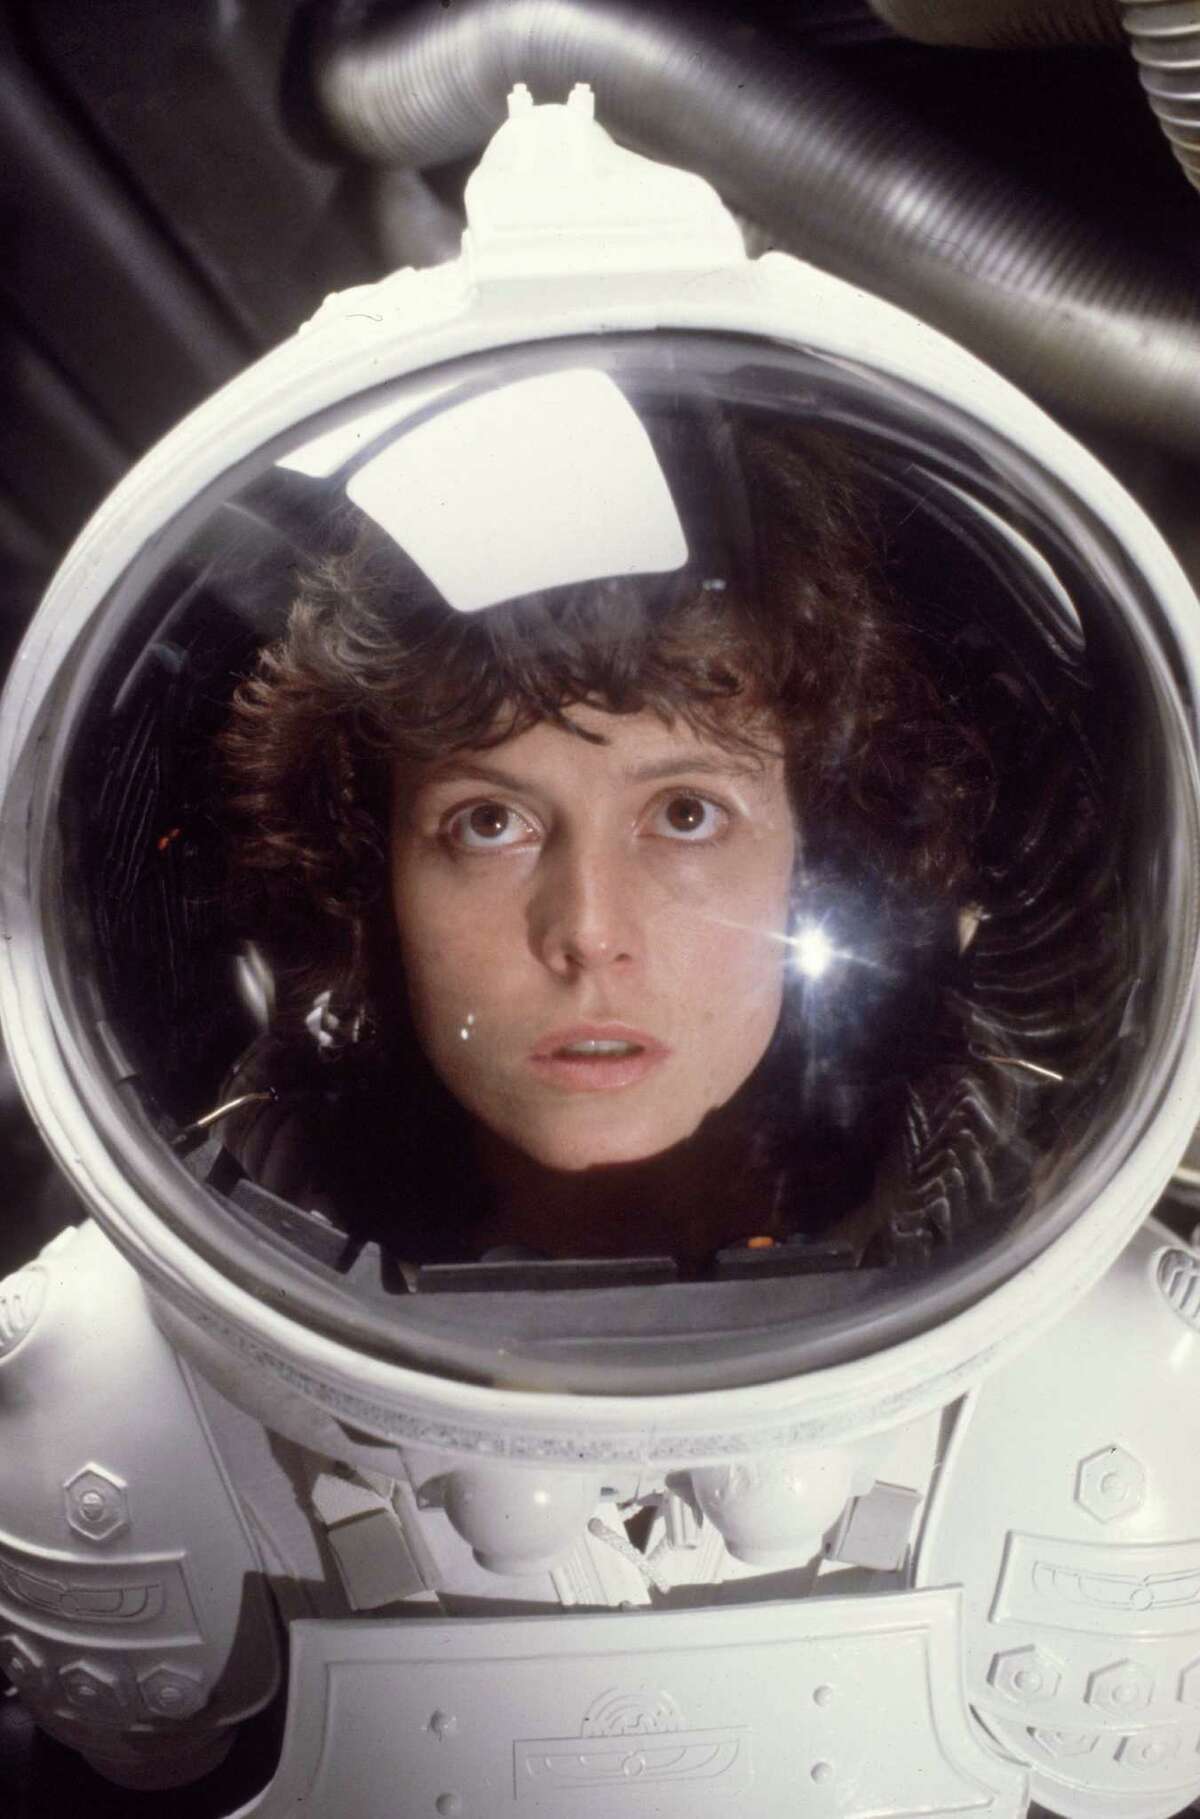 Born Oct. 8, 1949, American actress Sigourney Weaver is about to get another boost in a screen career that dates to 1977, when she had a bit part in Woody Allen's "Annie Hall." Seen here in the role of Ripley in the film "Alien" (1979), which put her on the map, Weaver is set to reprise her roles in upcoming additions to the franchises of "Alien," "Ghostbusters" and "Avatar."